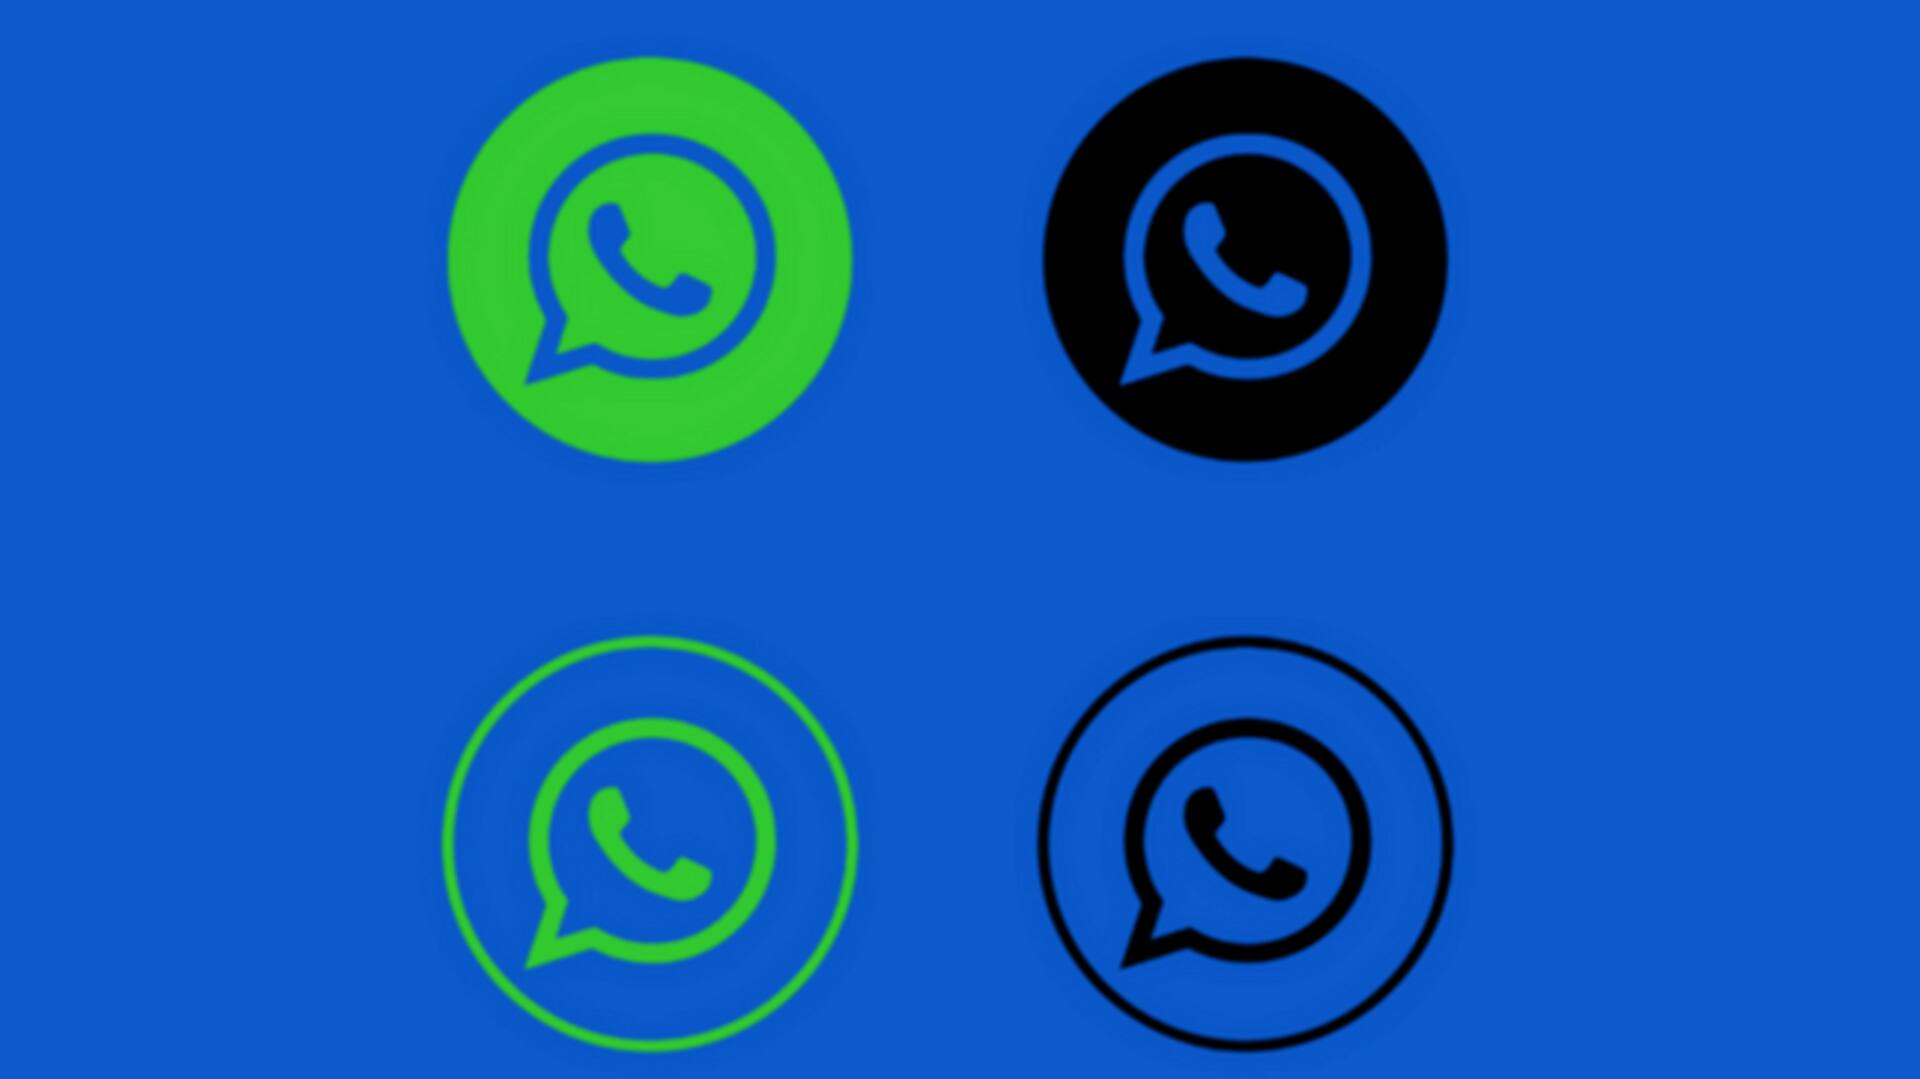 WhatsApp Channels will soon let you share voice messages, stickers